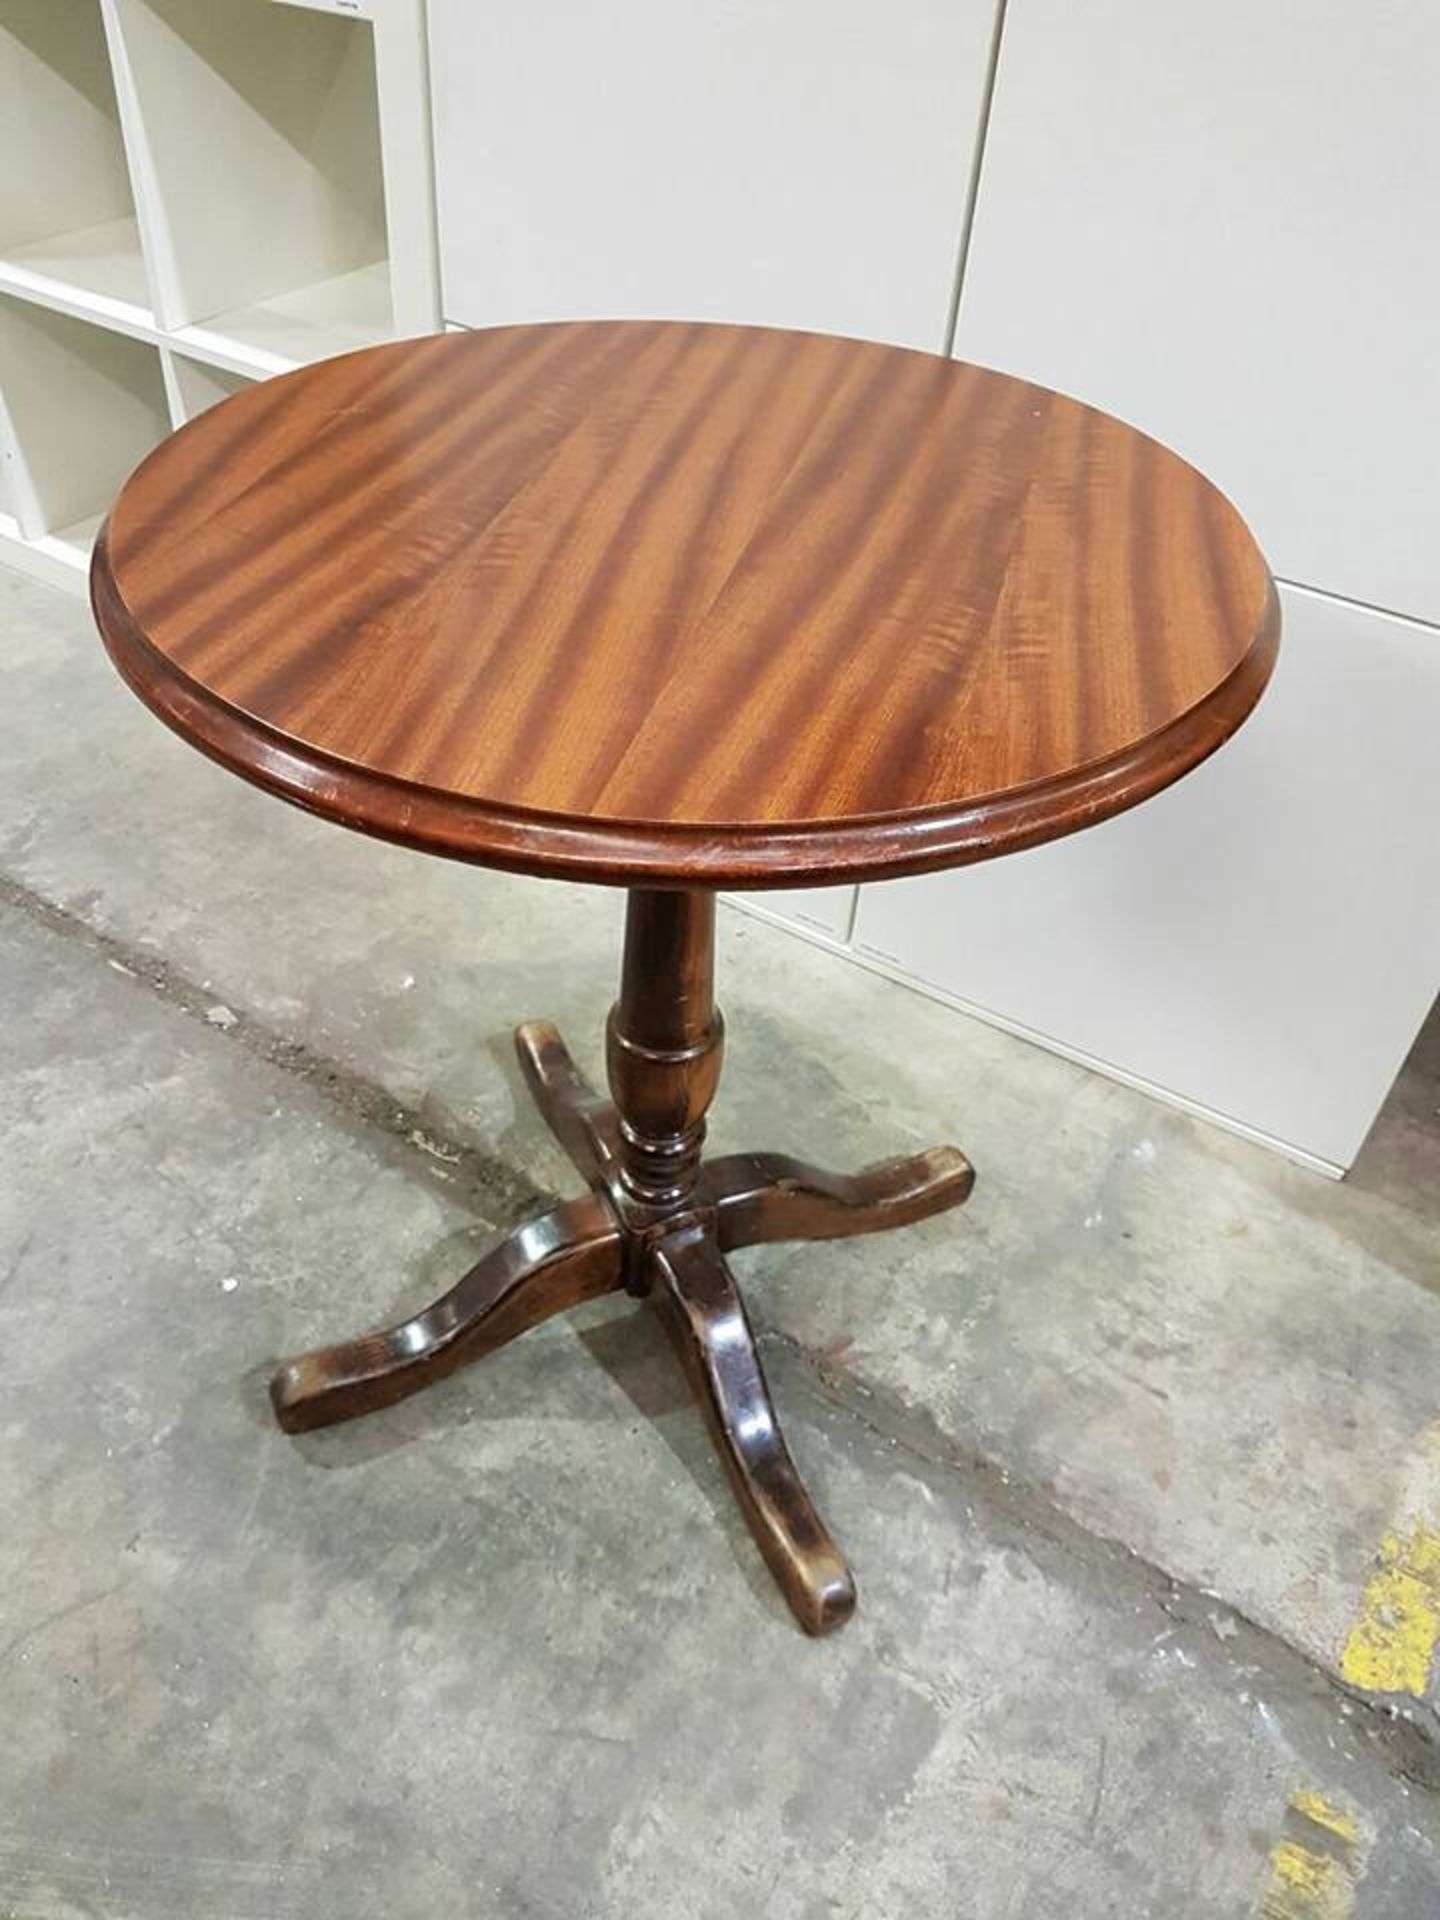 3 x Reproduction Victorian round bar table 600mm diameter with carved pedestal base, supported on